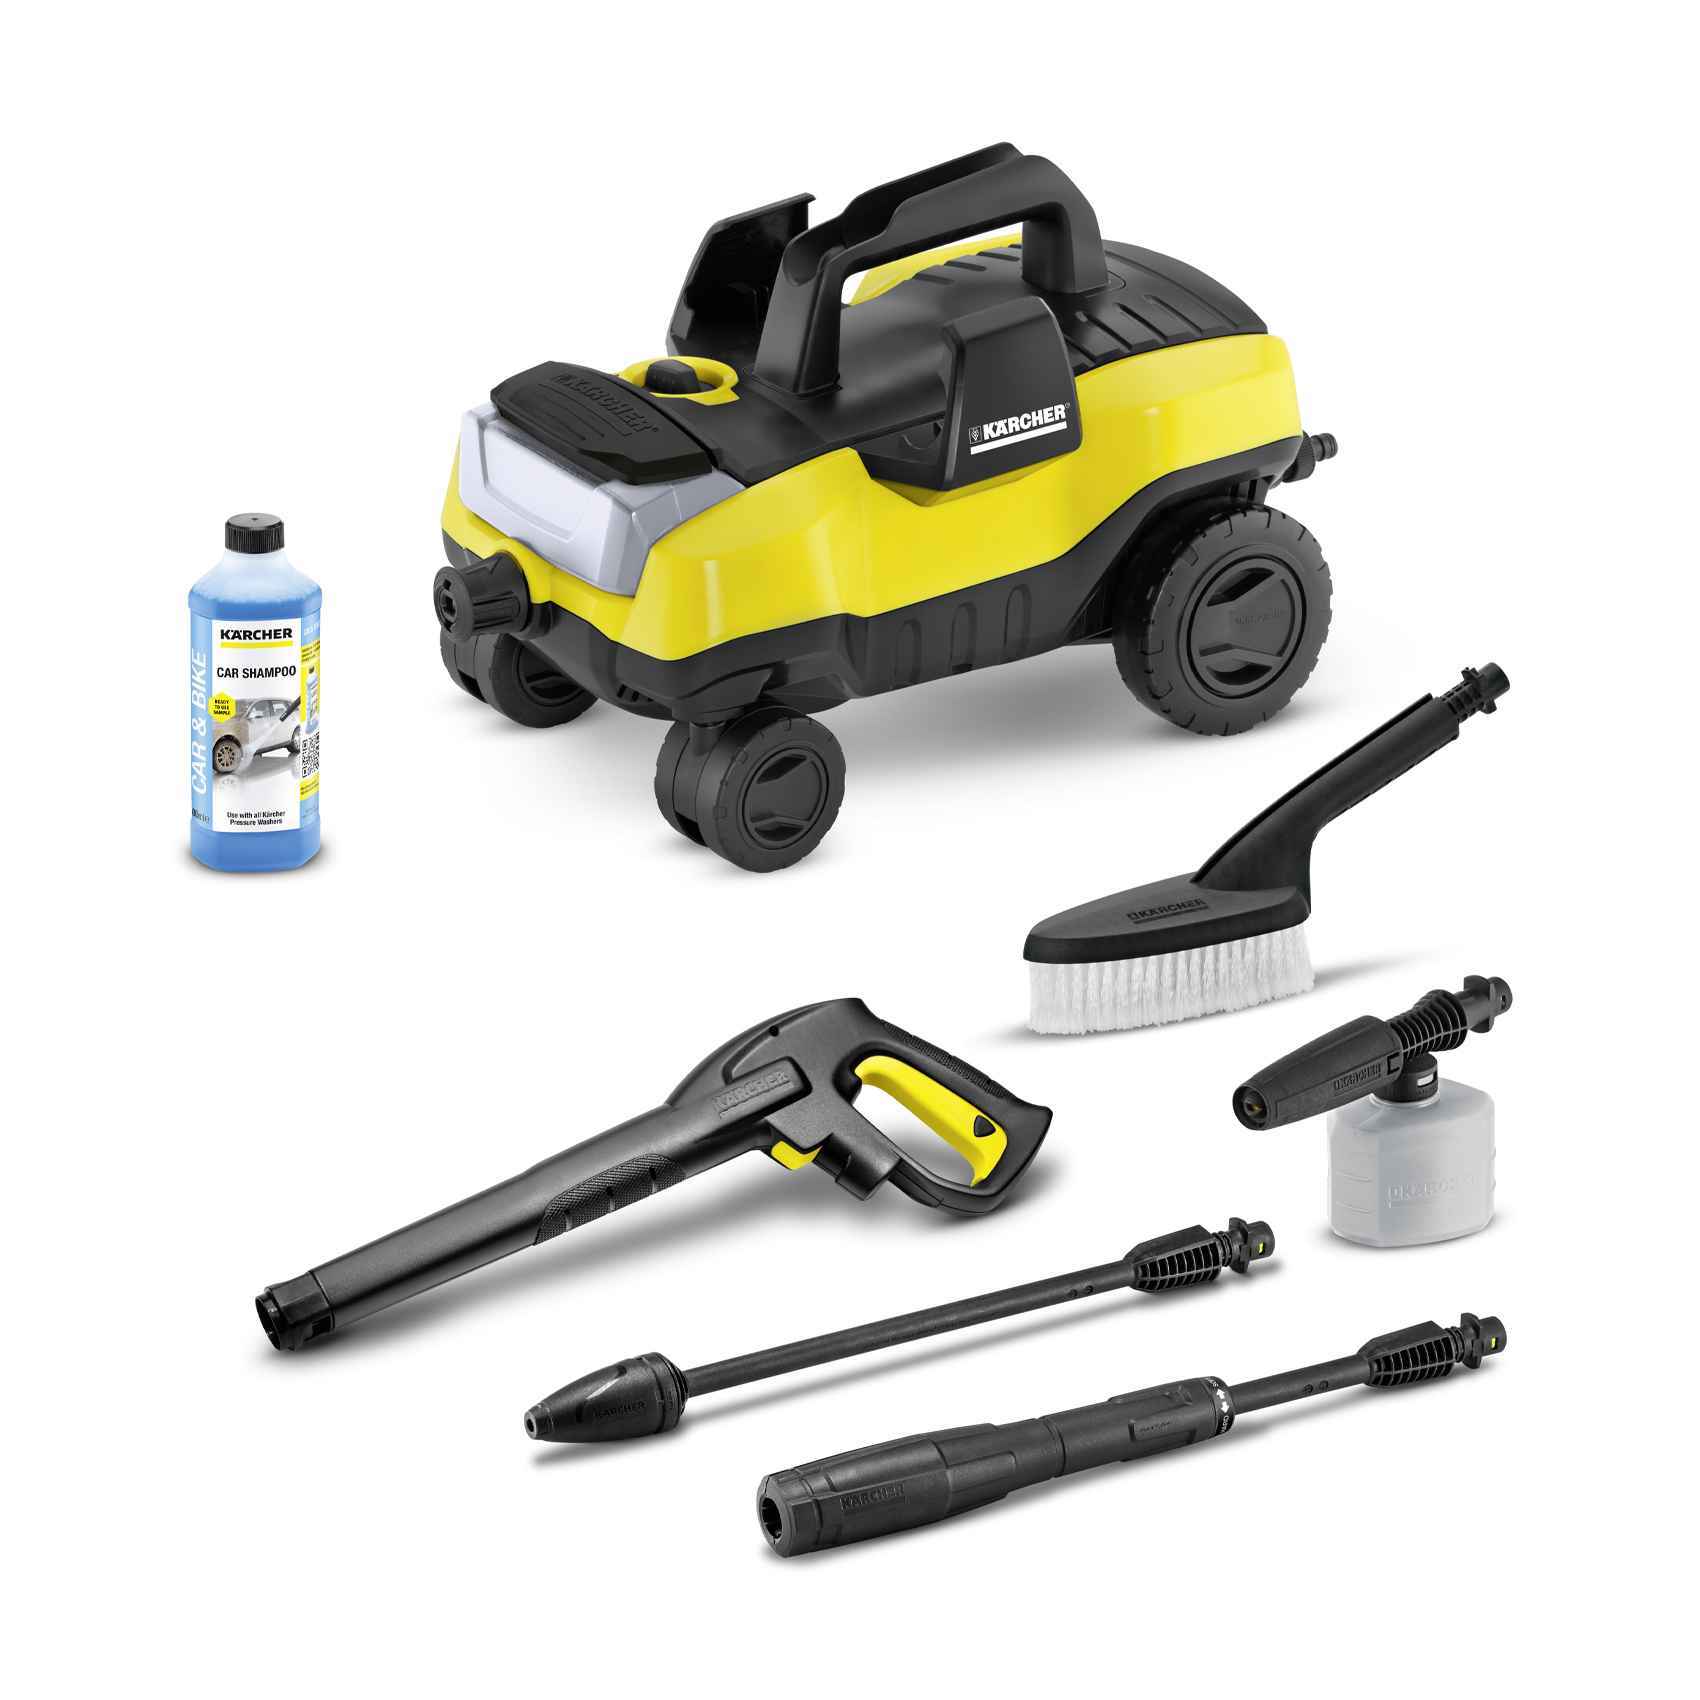 Buy Power washers Online - Shop on Carrefour Qatar